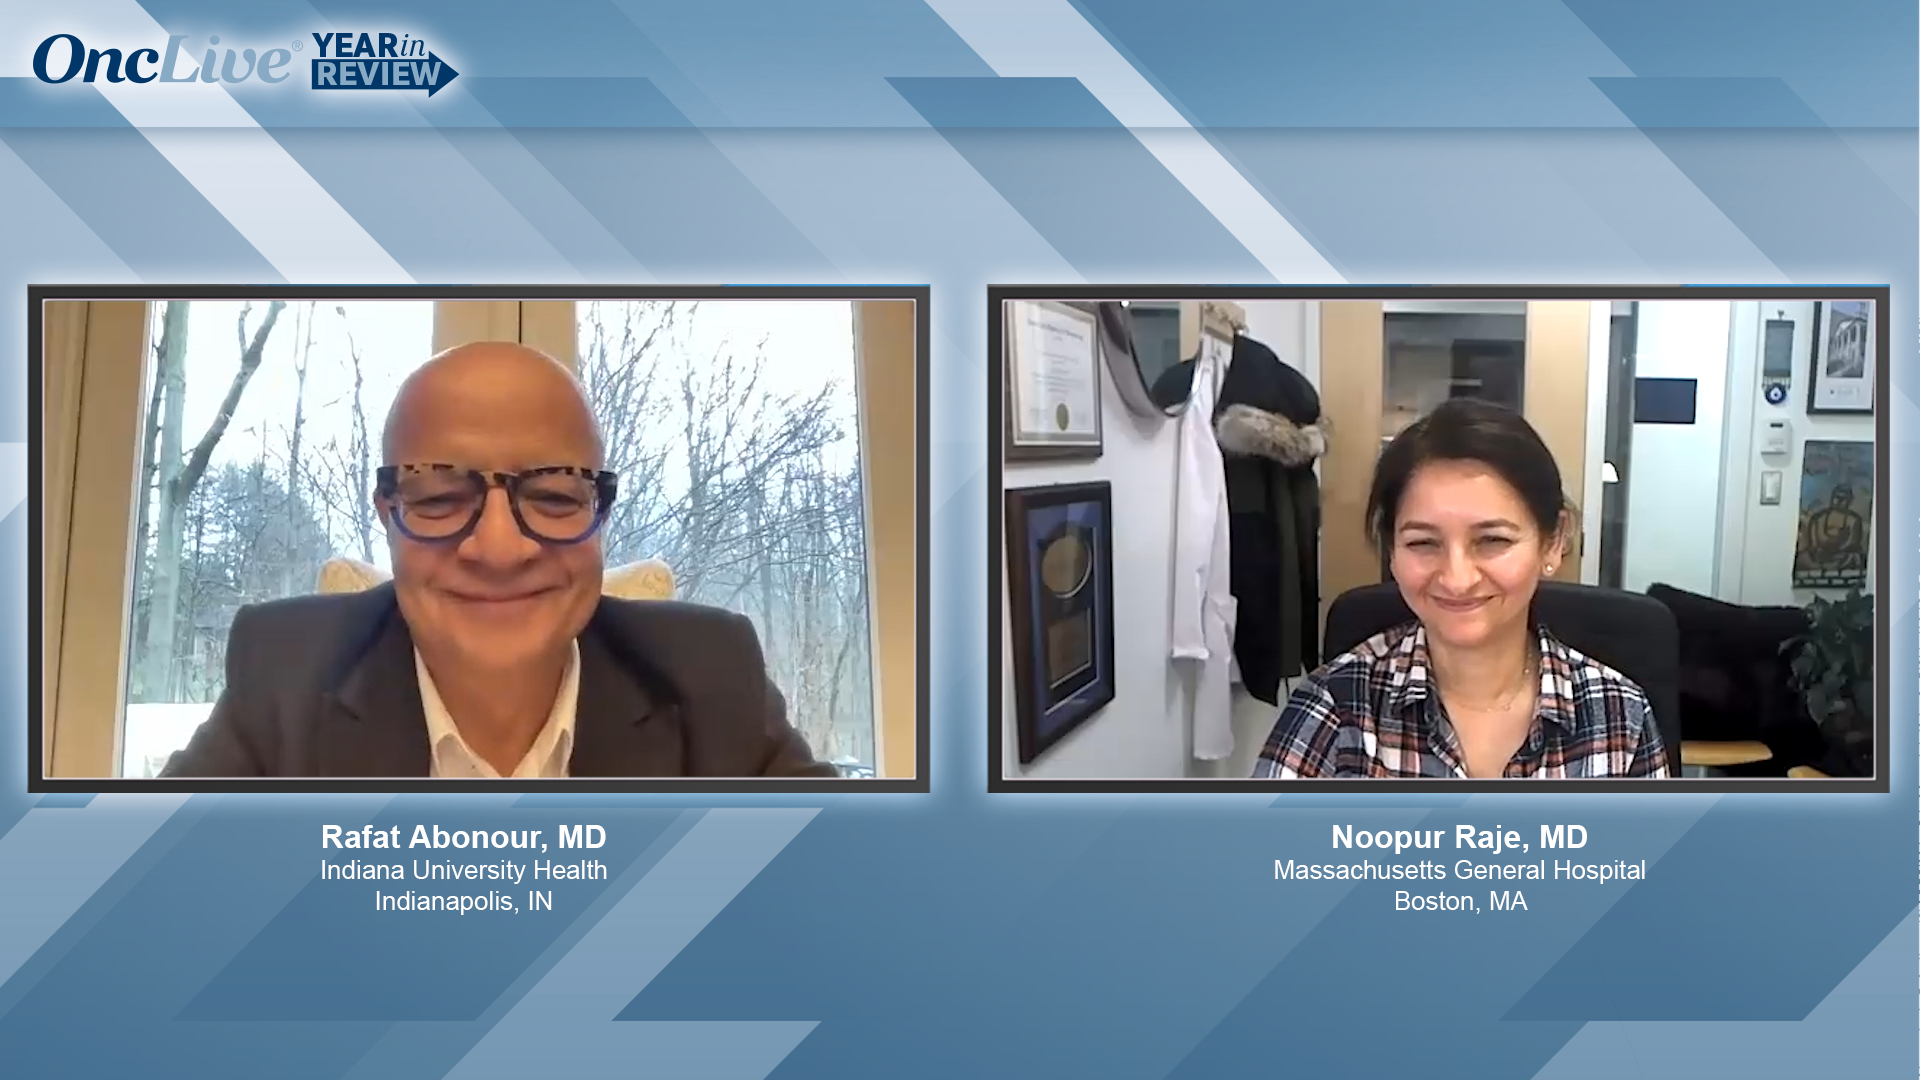 Rafat Abonour, MD, and Noopur Raje, MD, experts on multiple myeloma